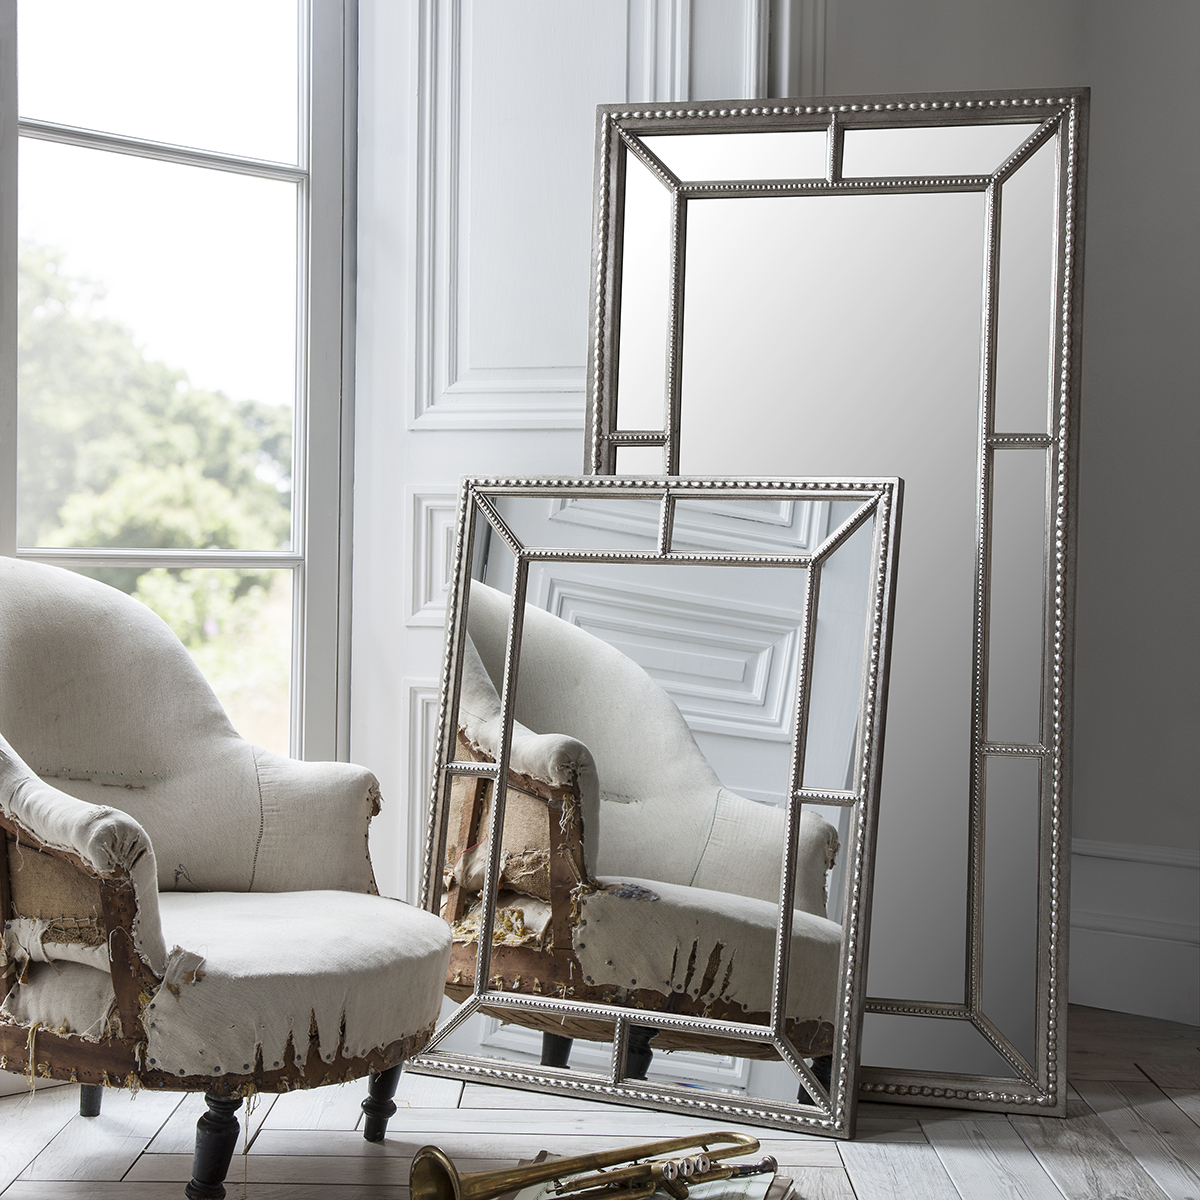 Gallery Direct Lawson Mirror | Shackletons